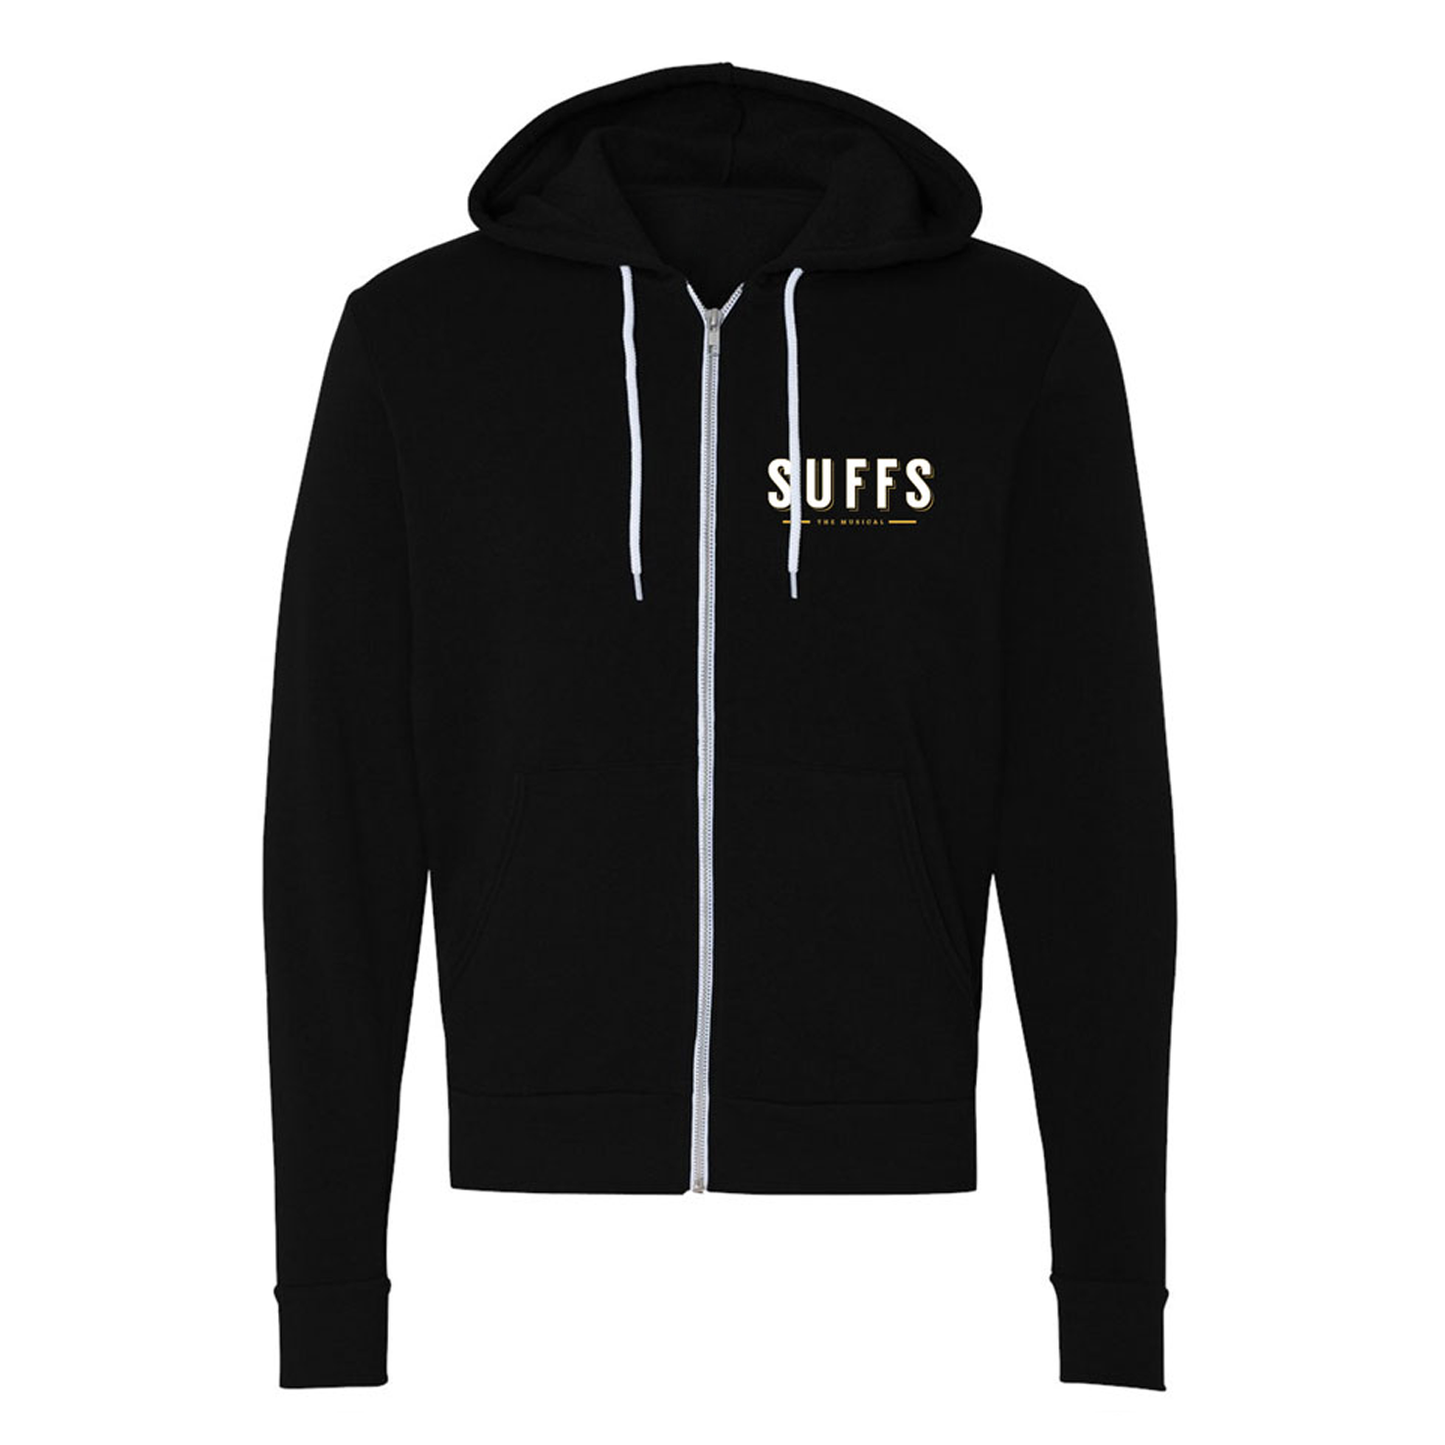 SUFFS Now Is The Next Time Zip Hoodie